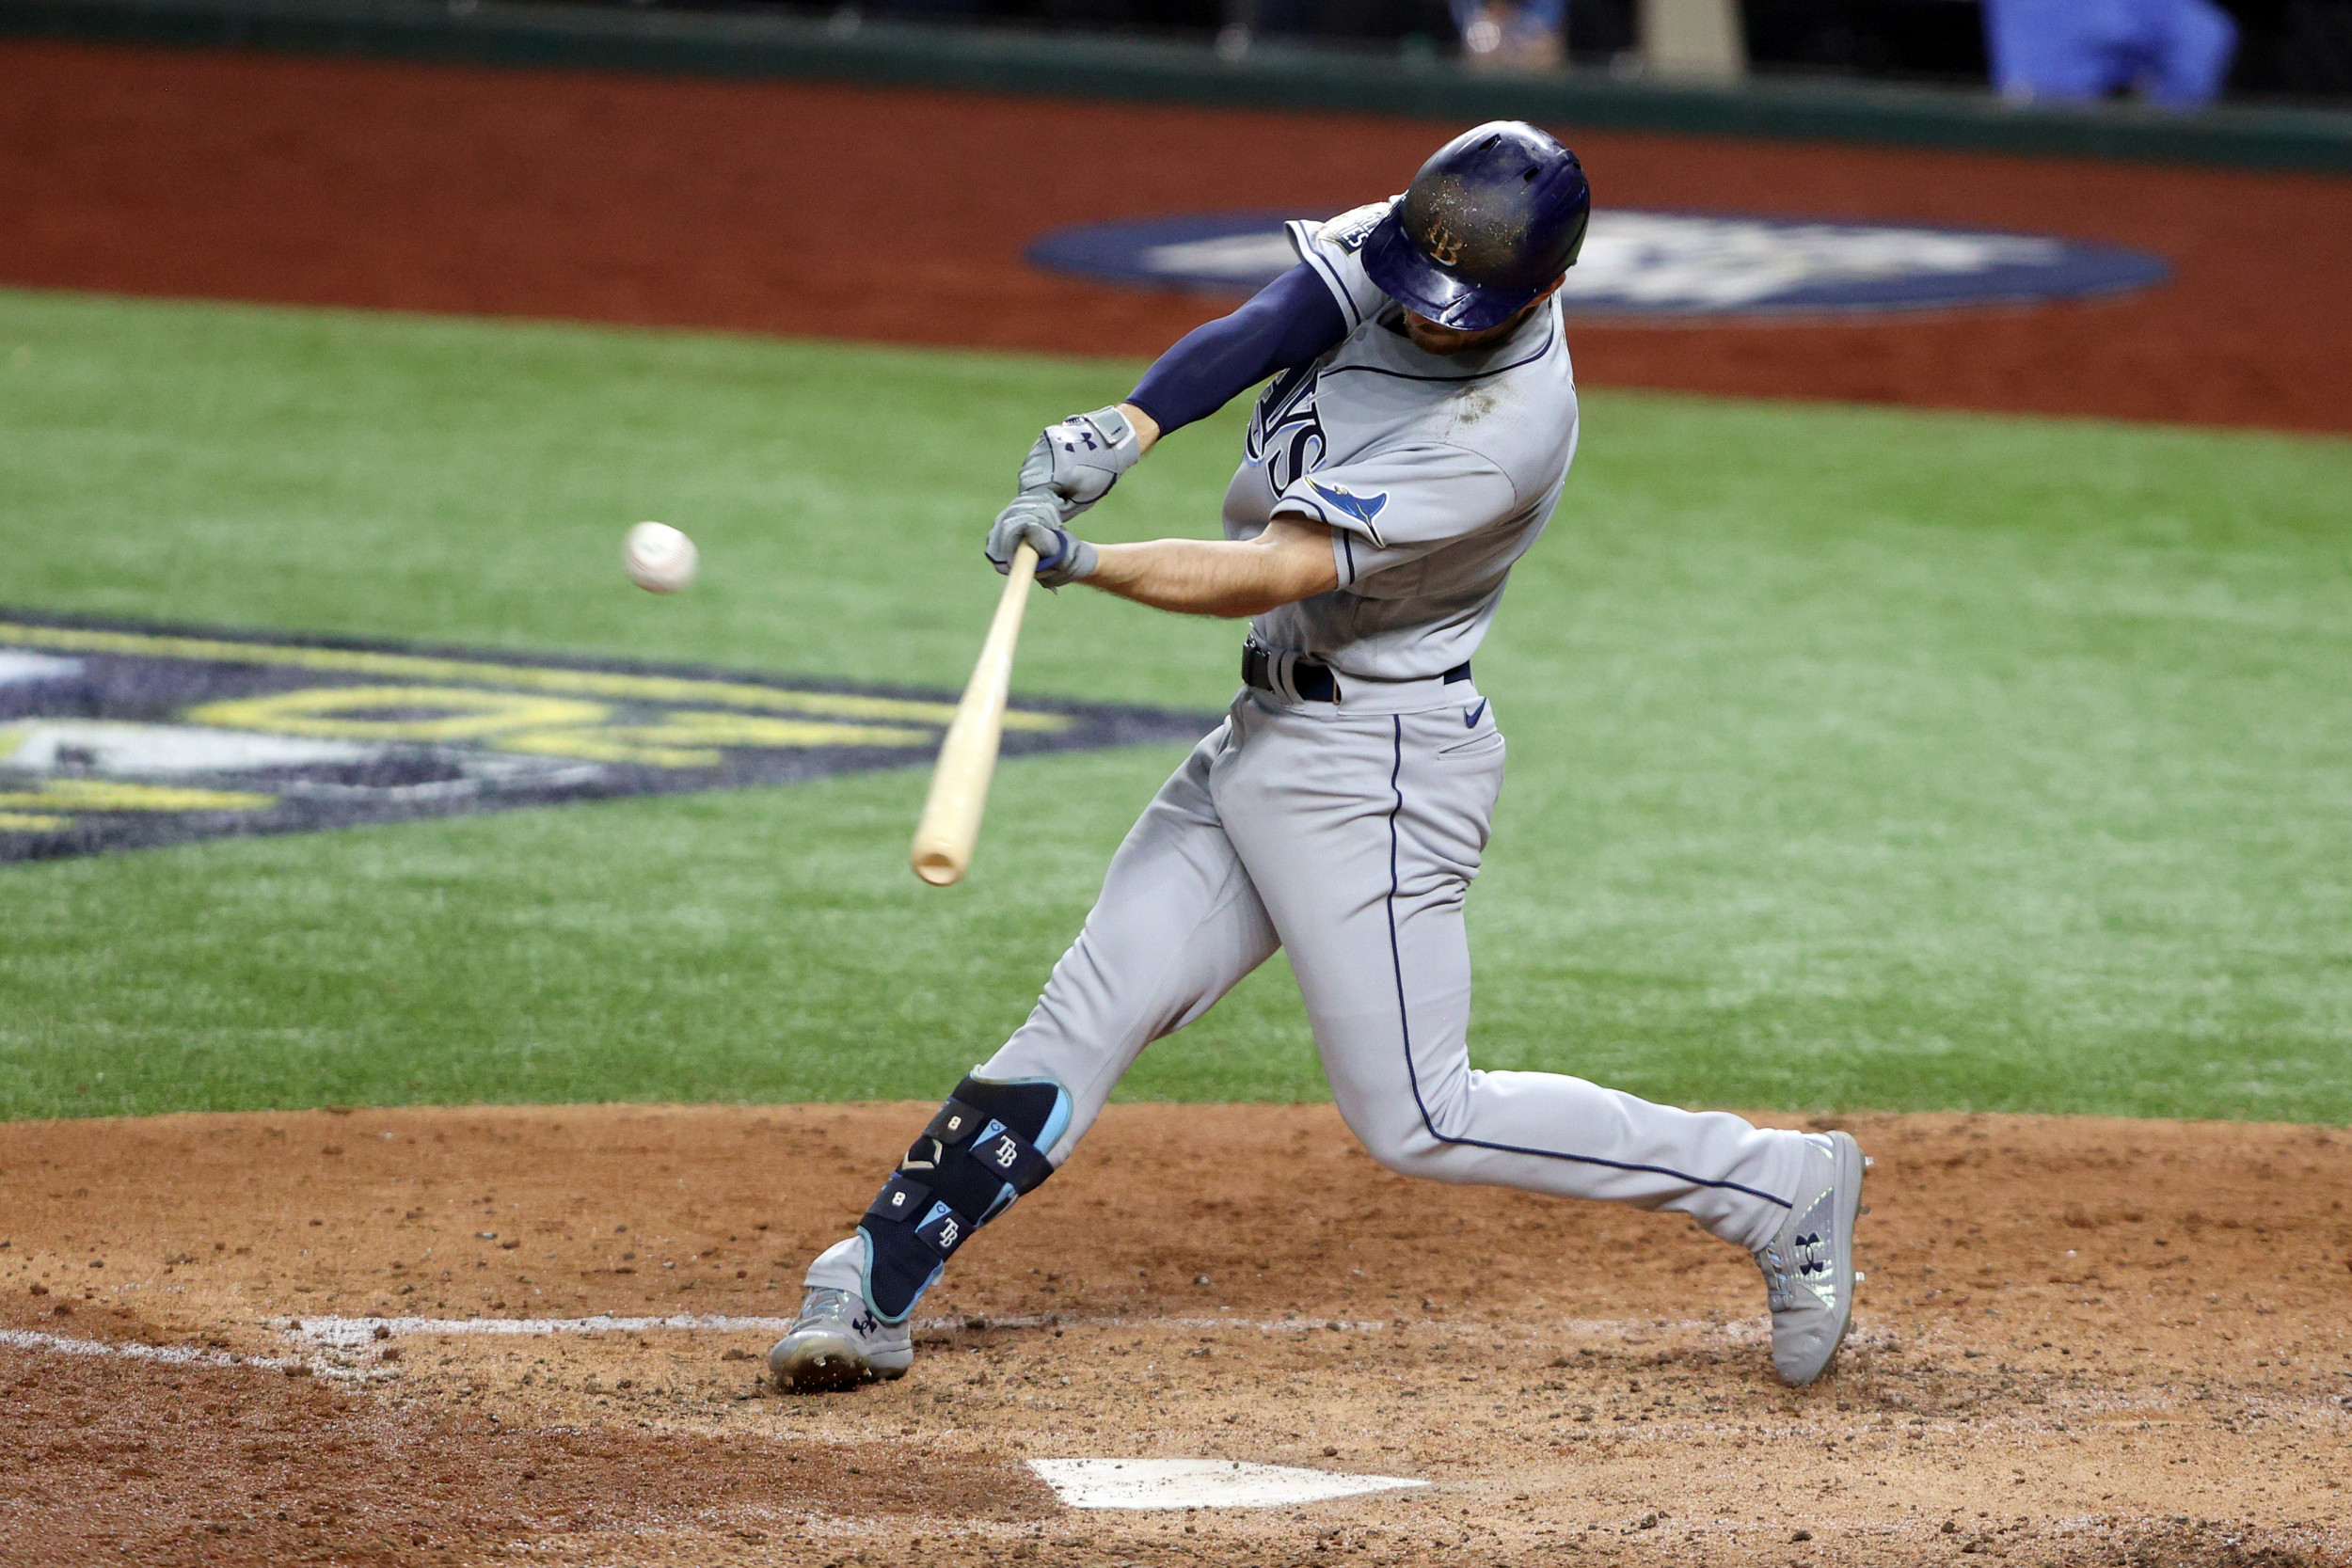 Brandon Lowe crushes walkoff homer as Rays best White Sox